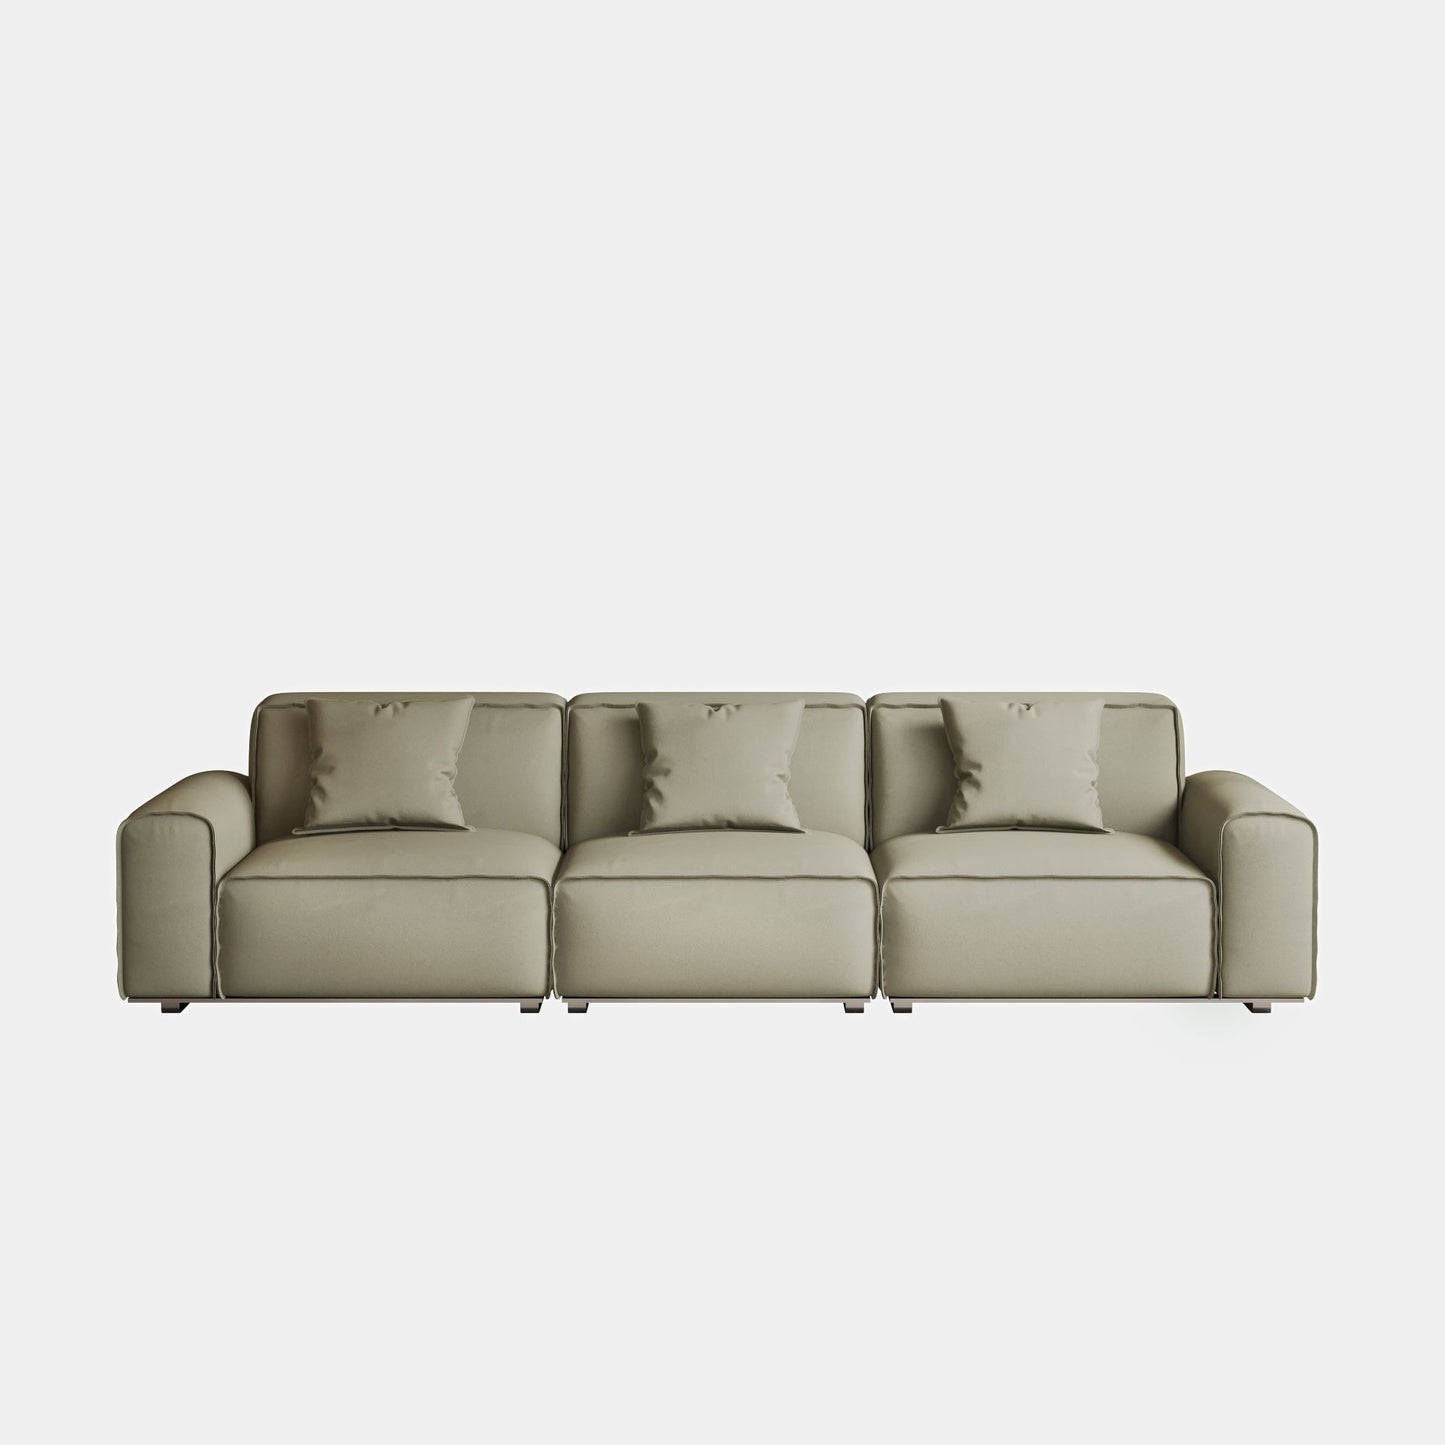 Colby white top grain full leather 3 seat sofa